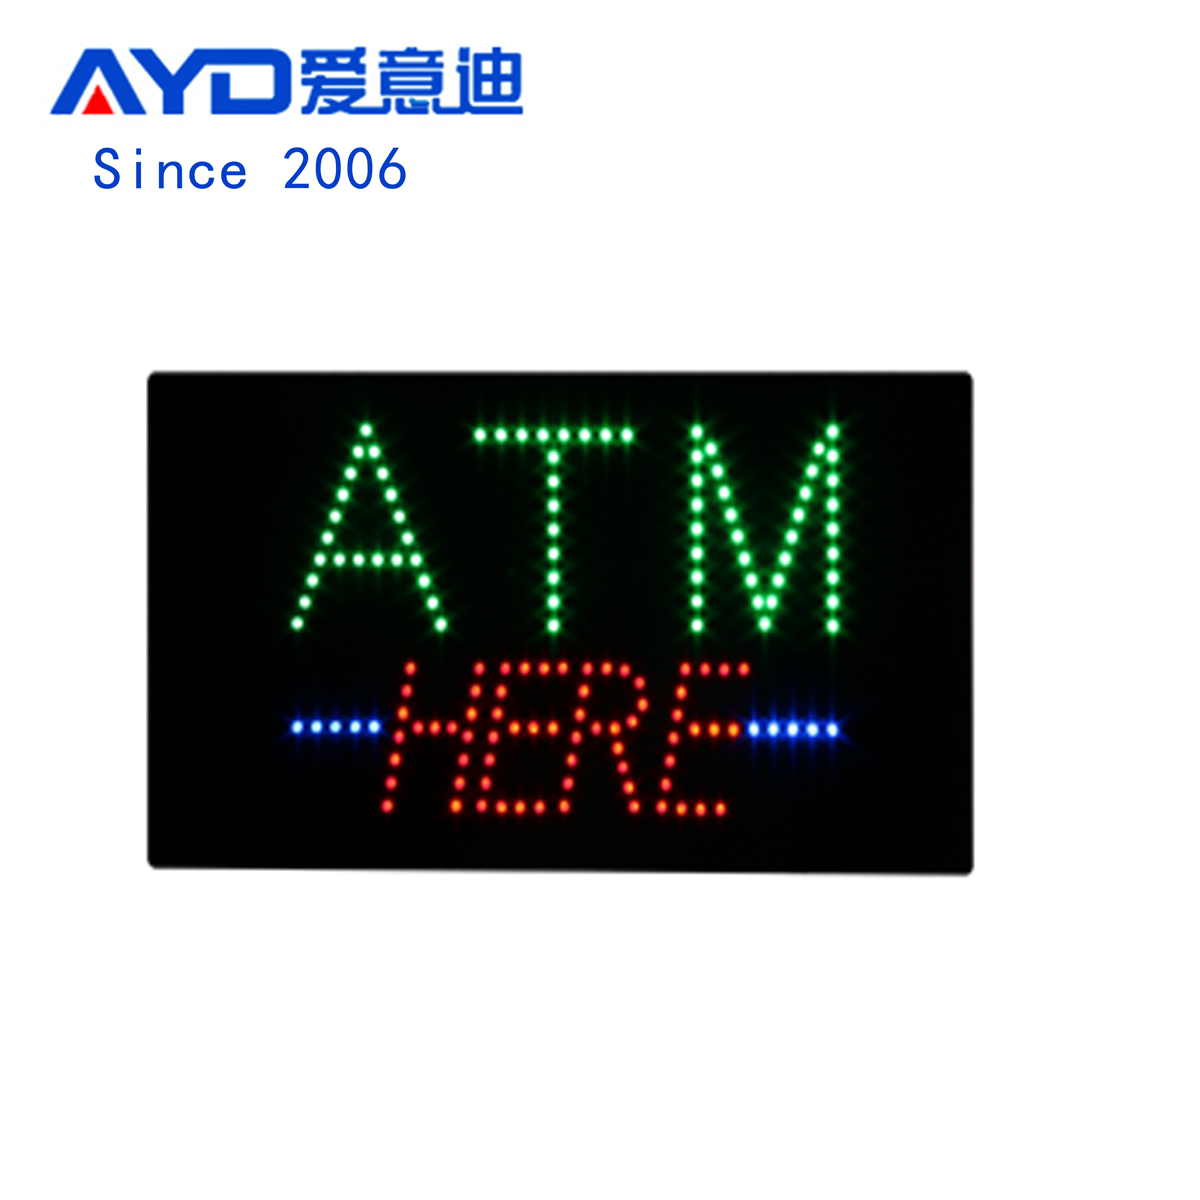 AYD LED Bright ATM Here Signs For Sales